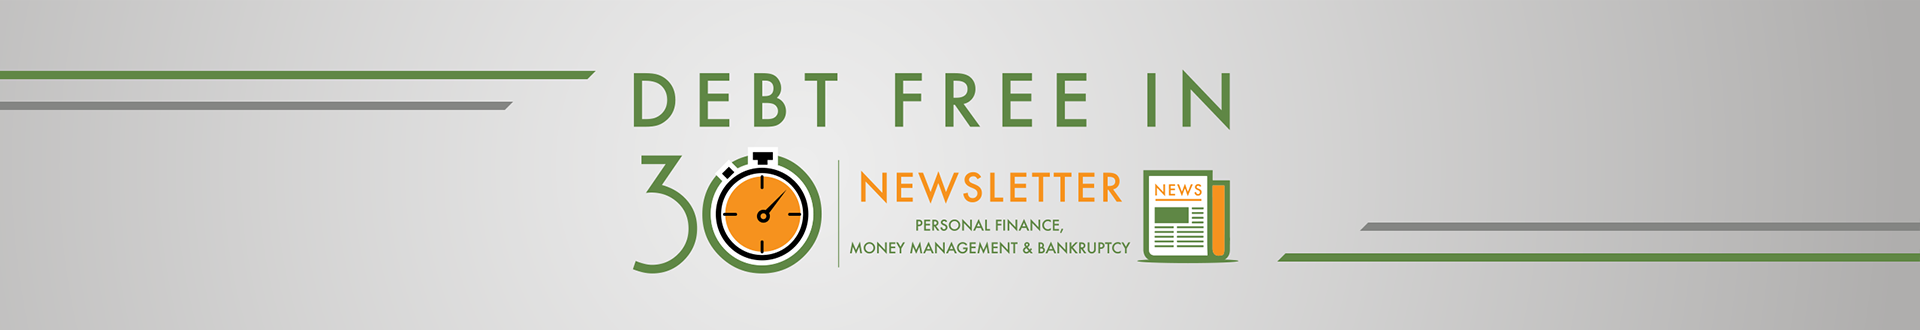 Hoyes Michalos Debt Free in 30 Newsletter Archive